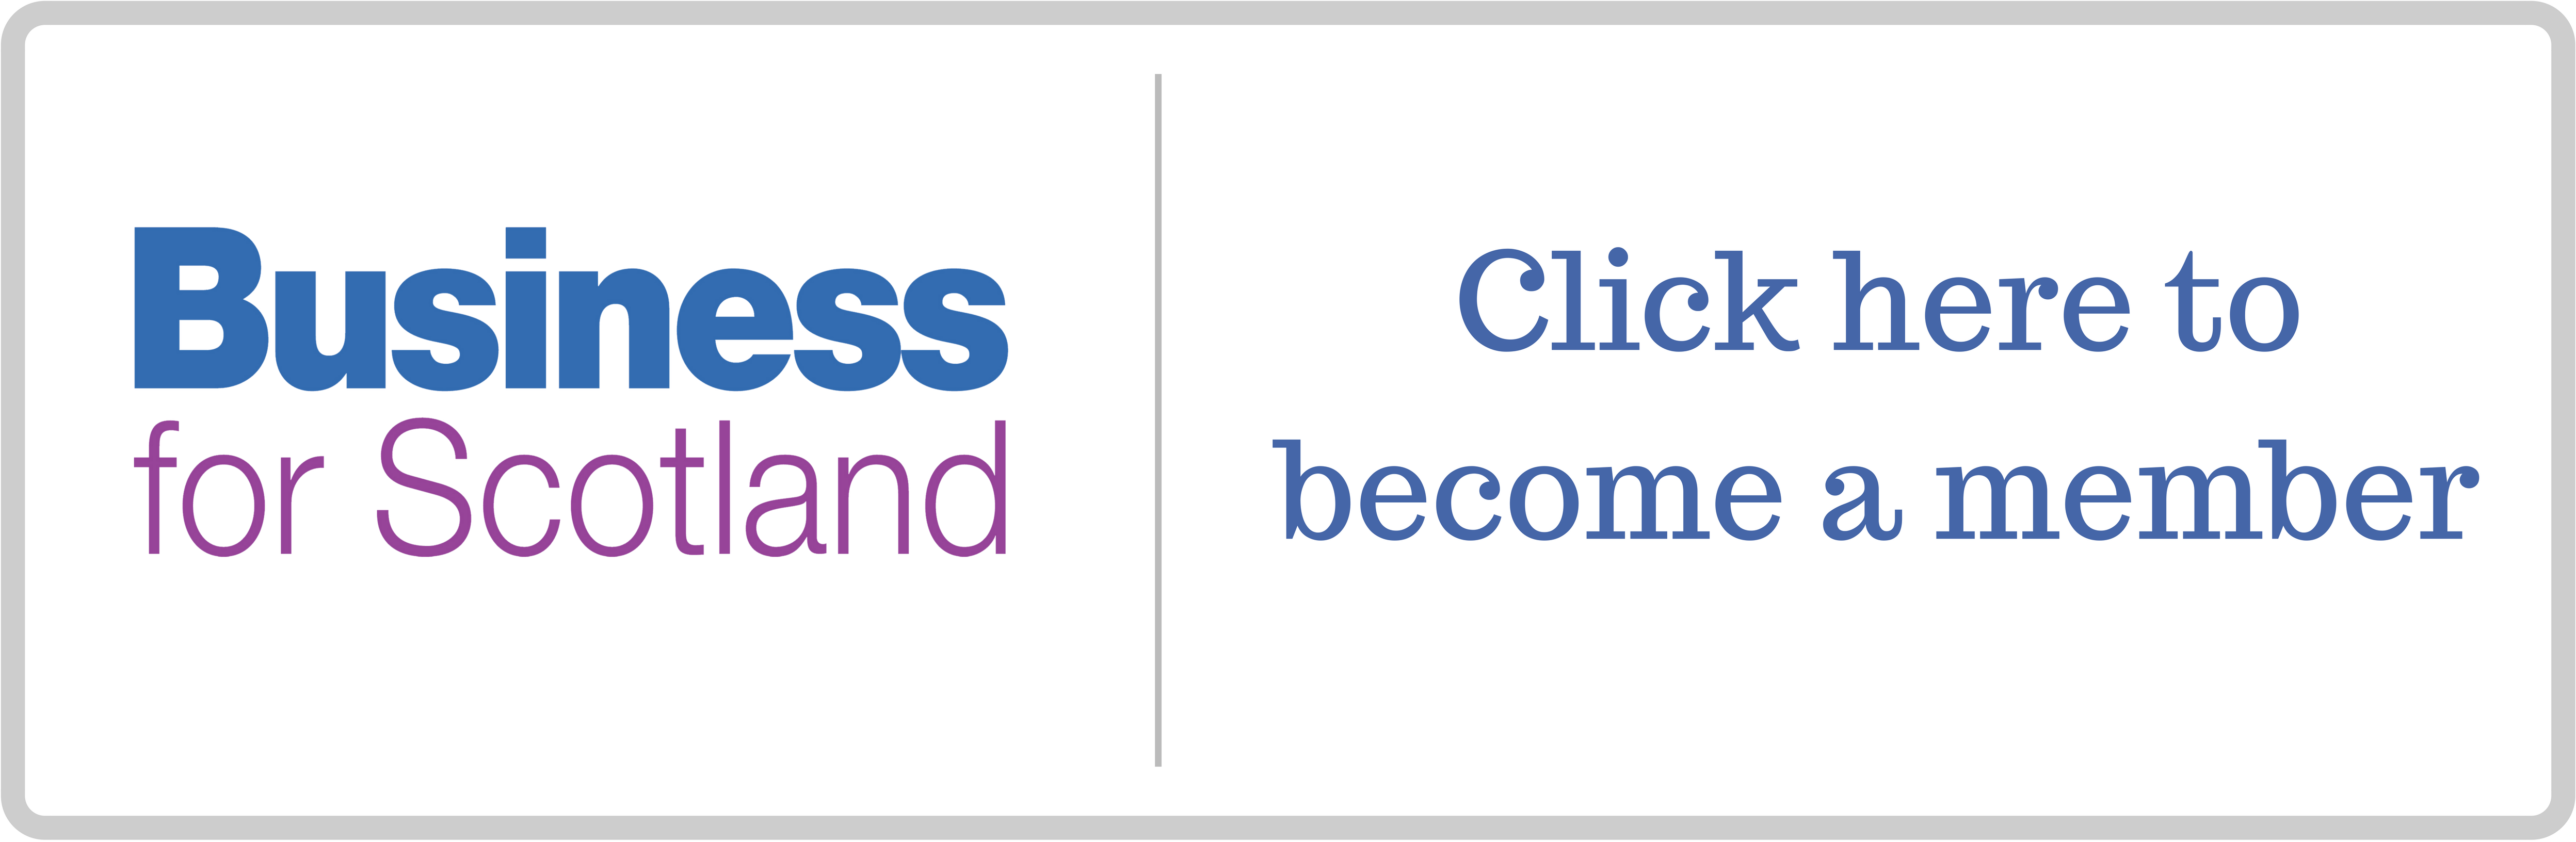 Become a member of Business for Scotland